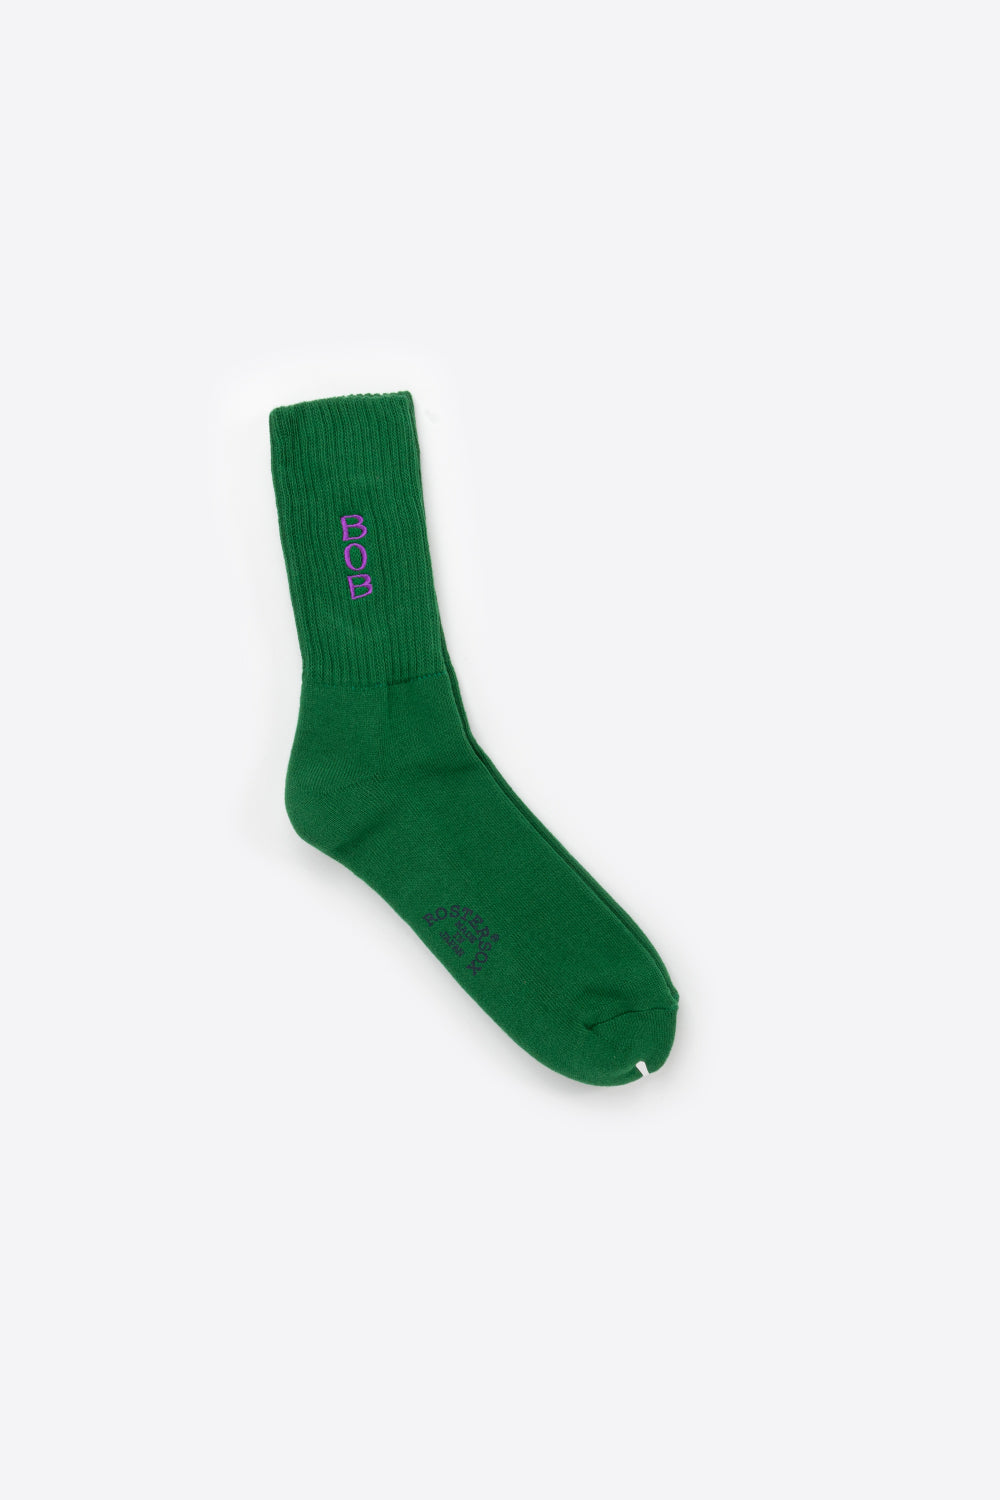 Rostersox souvenirs green front